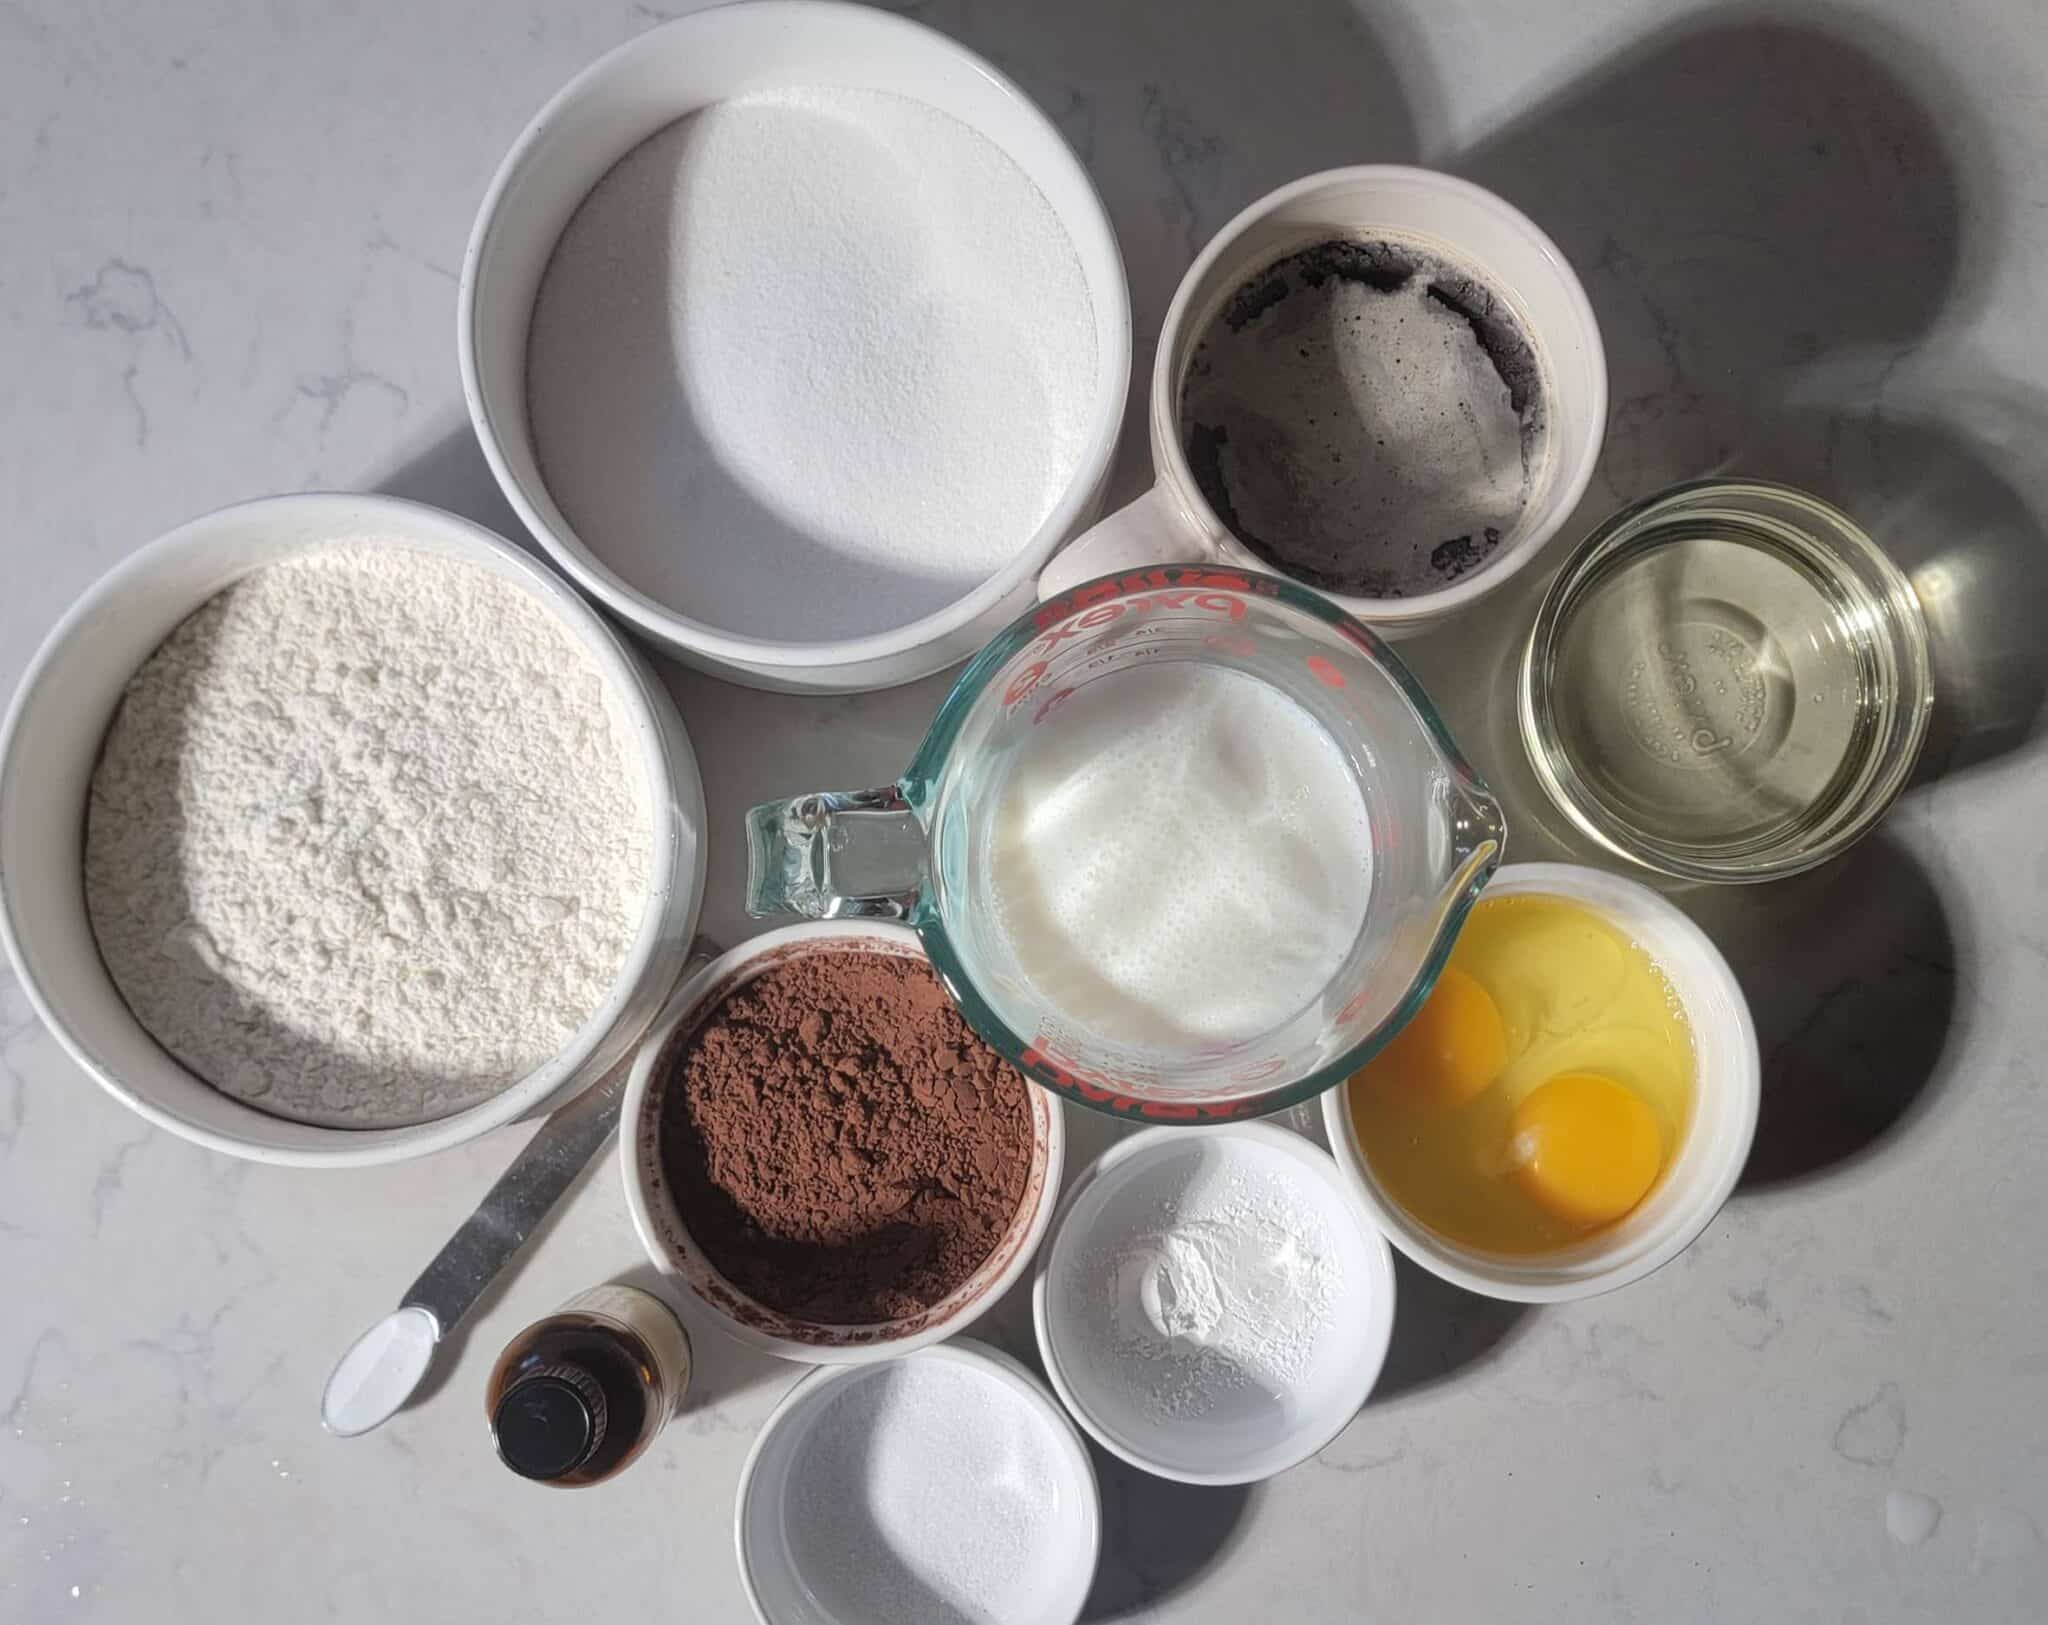 Ingredients for Matilda's Chocolate Cake recipe neatly laid out on a marble countertop, including flour, sugar, cocoa powder, and eggs, with sunlight casting soft shadows.